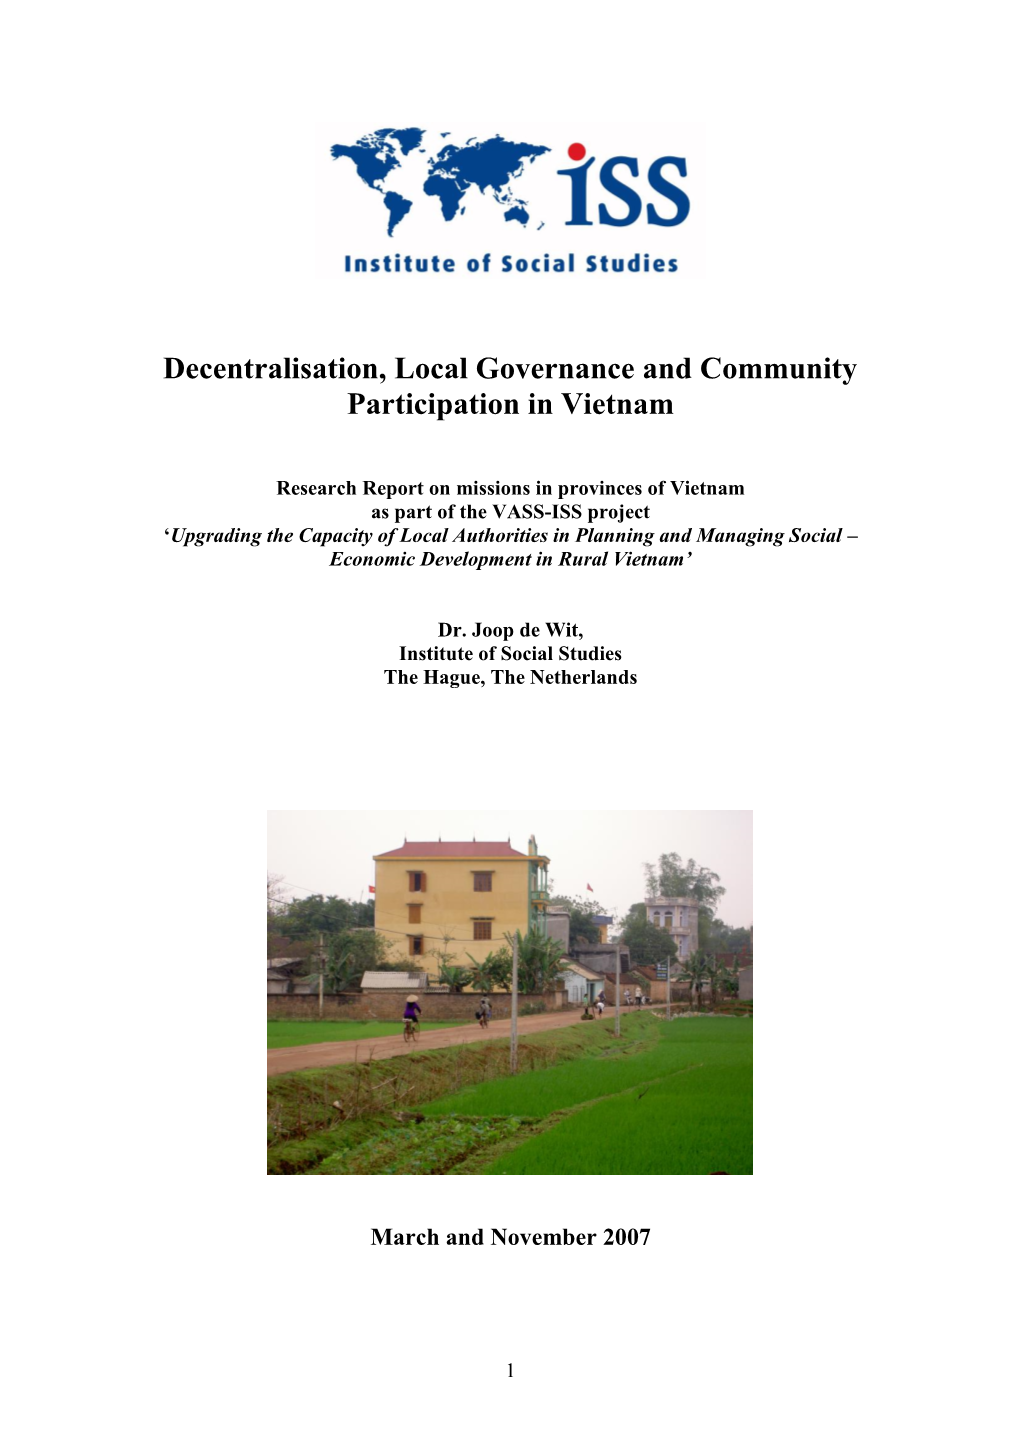 Decentralisation, Local Governance and Community Participation in Vietnam